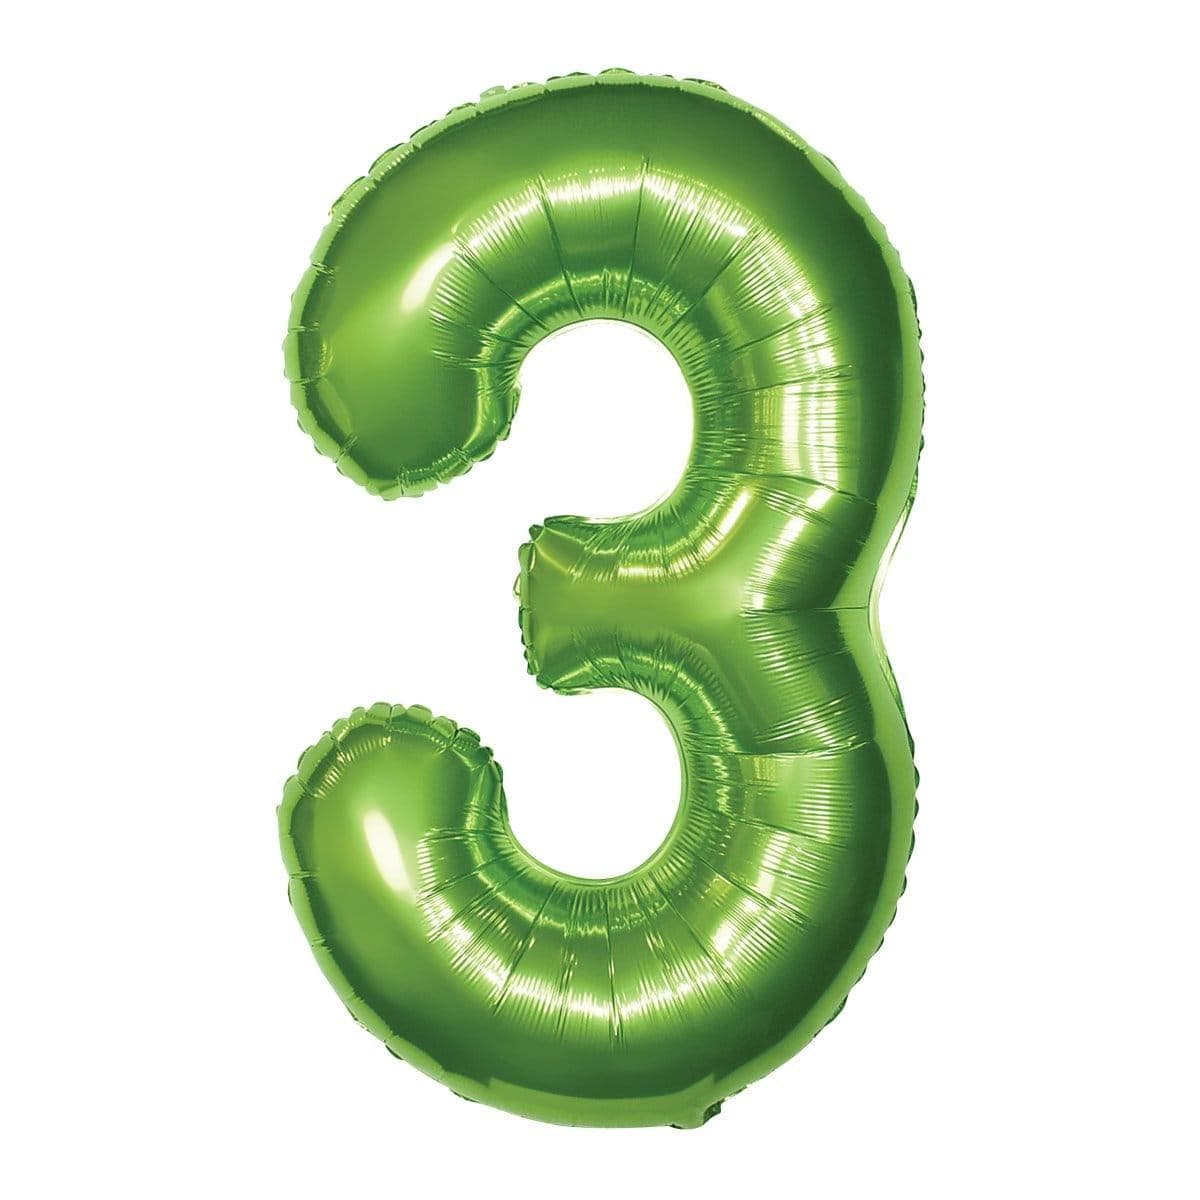 Buy Balloons Lime Green Number 3 Foil Balloon, 34 Inches sold at Party Expert